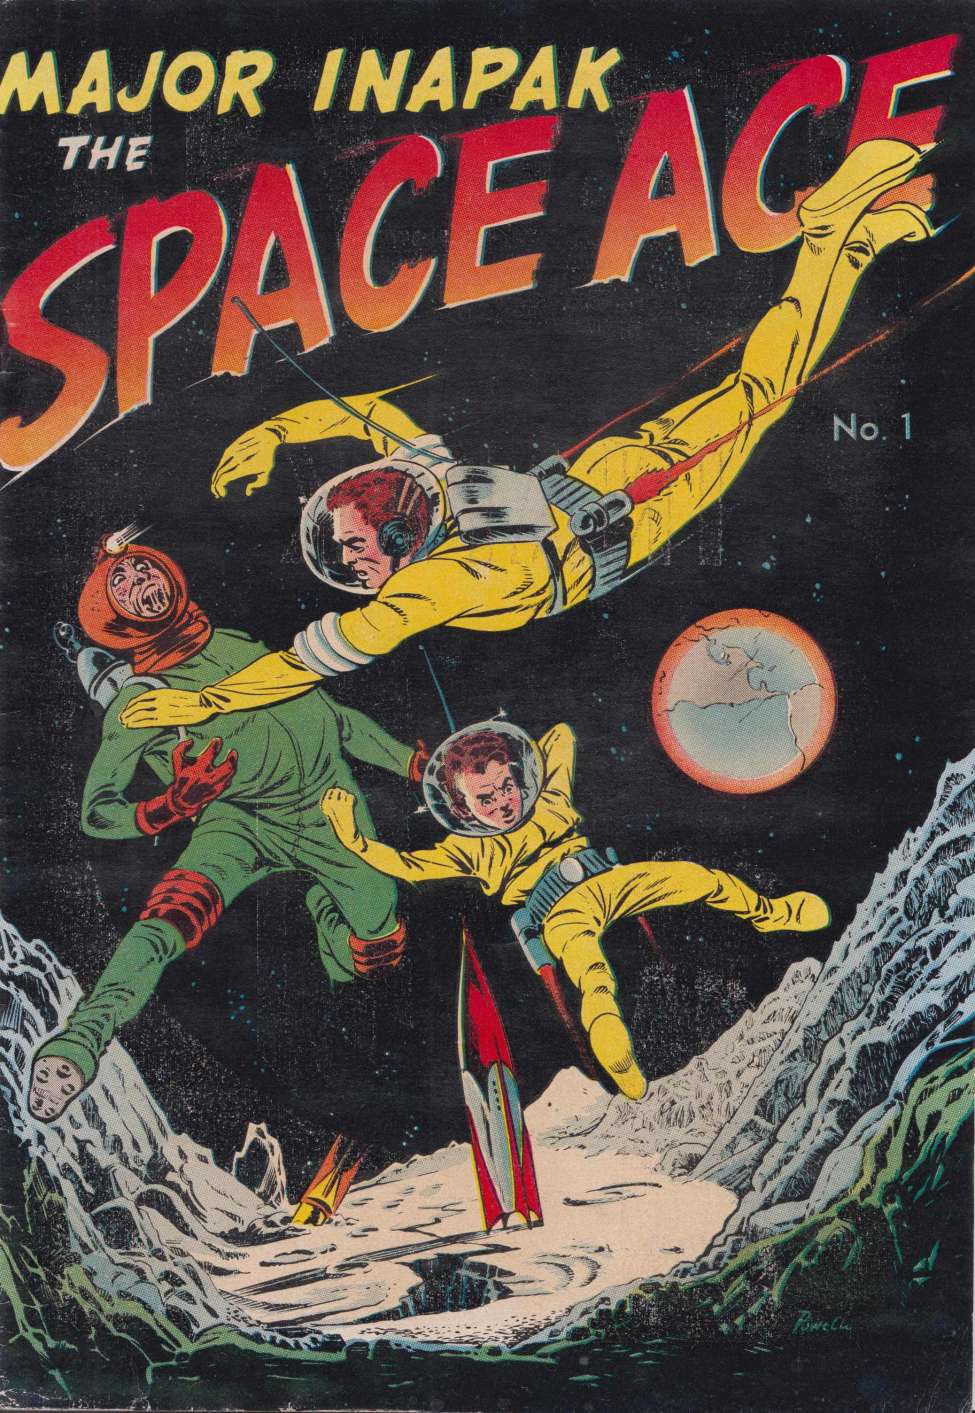 Comic Book Cover For Major Inapak The Space Ace 1 (alt) - Version 2